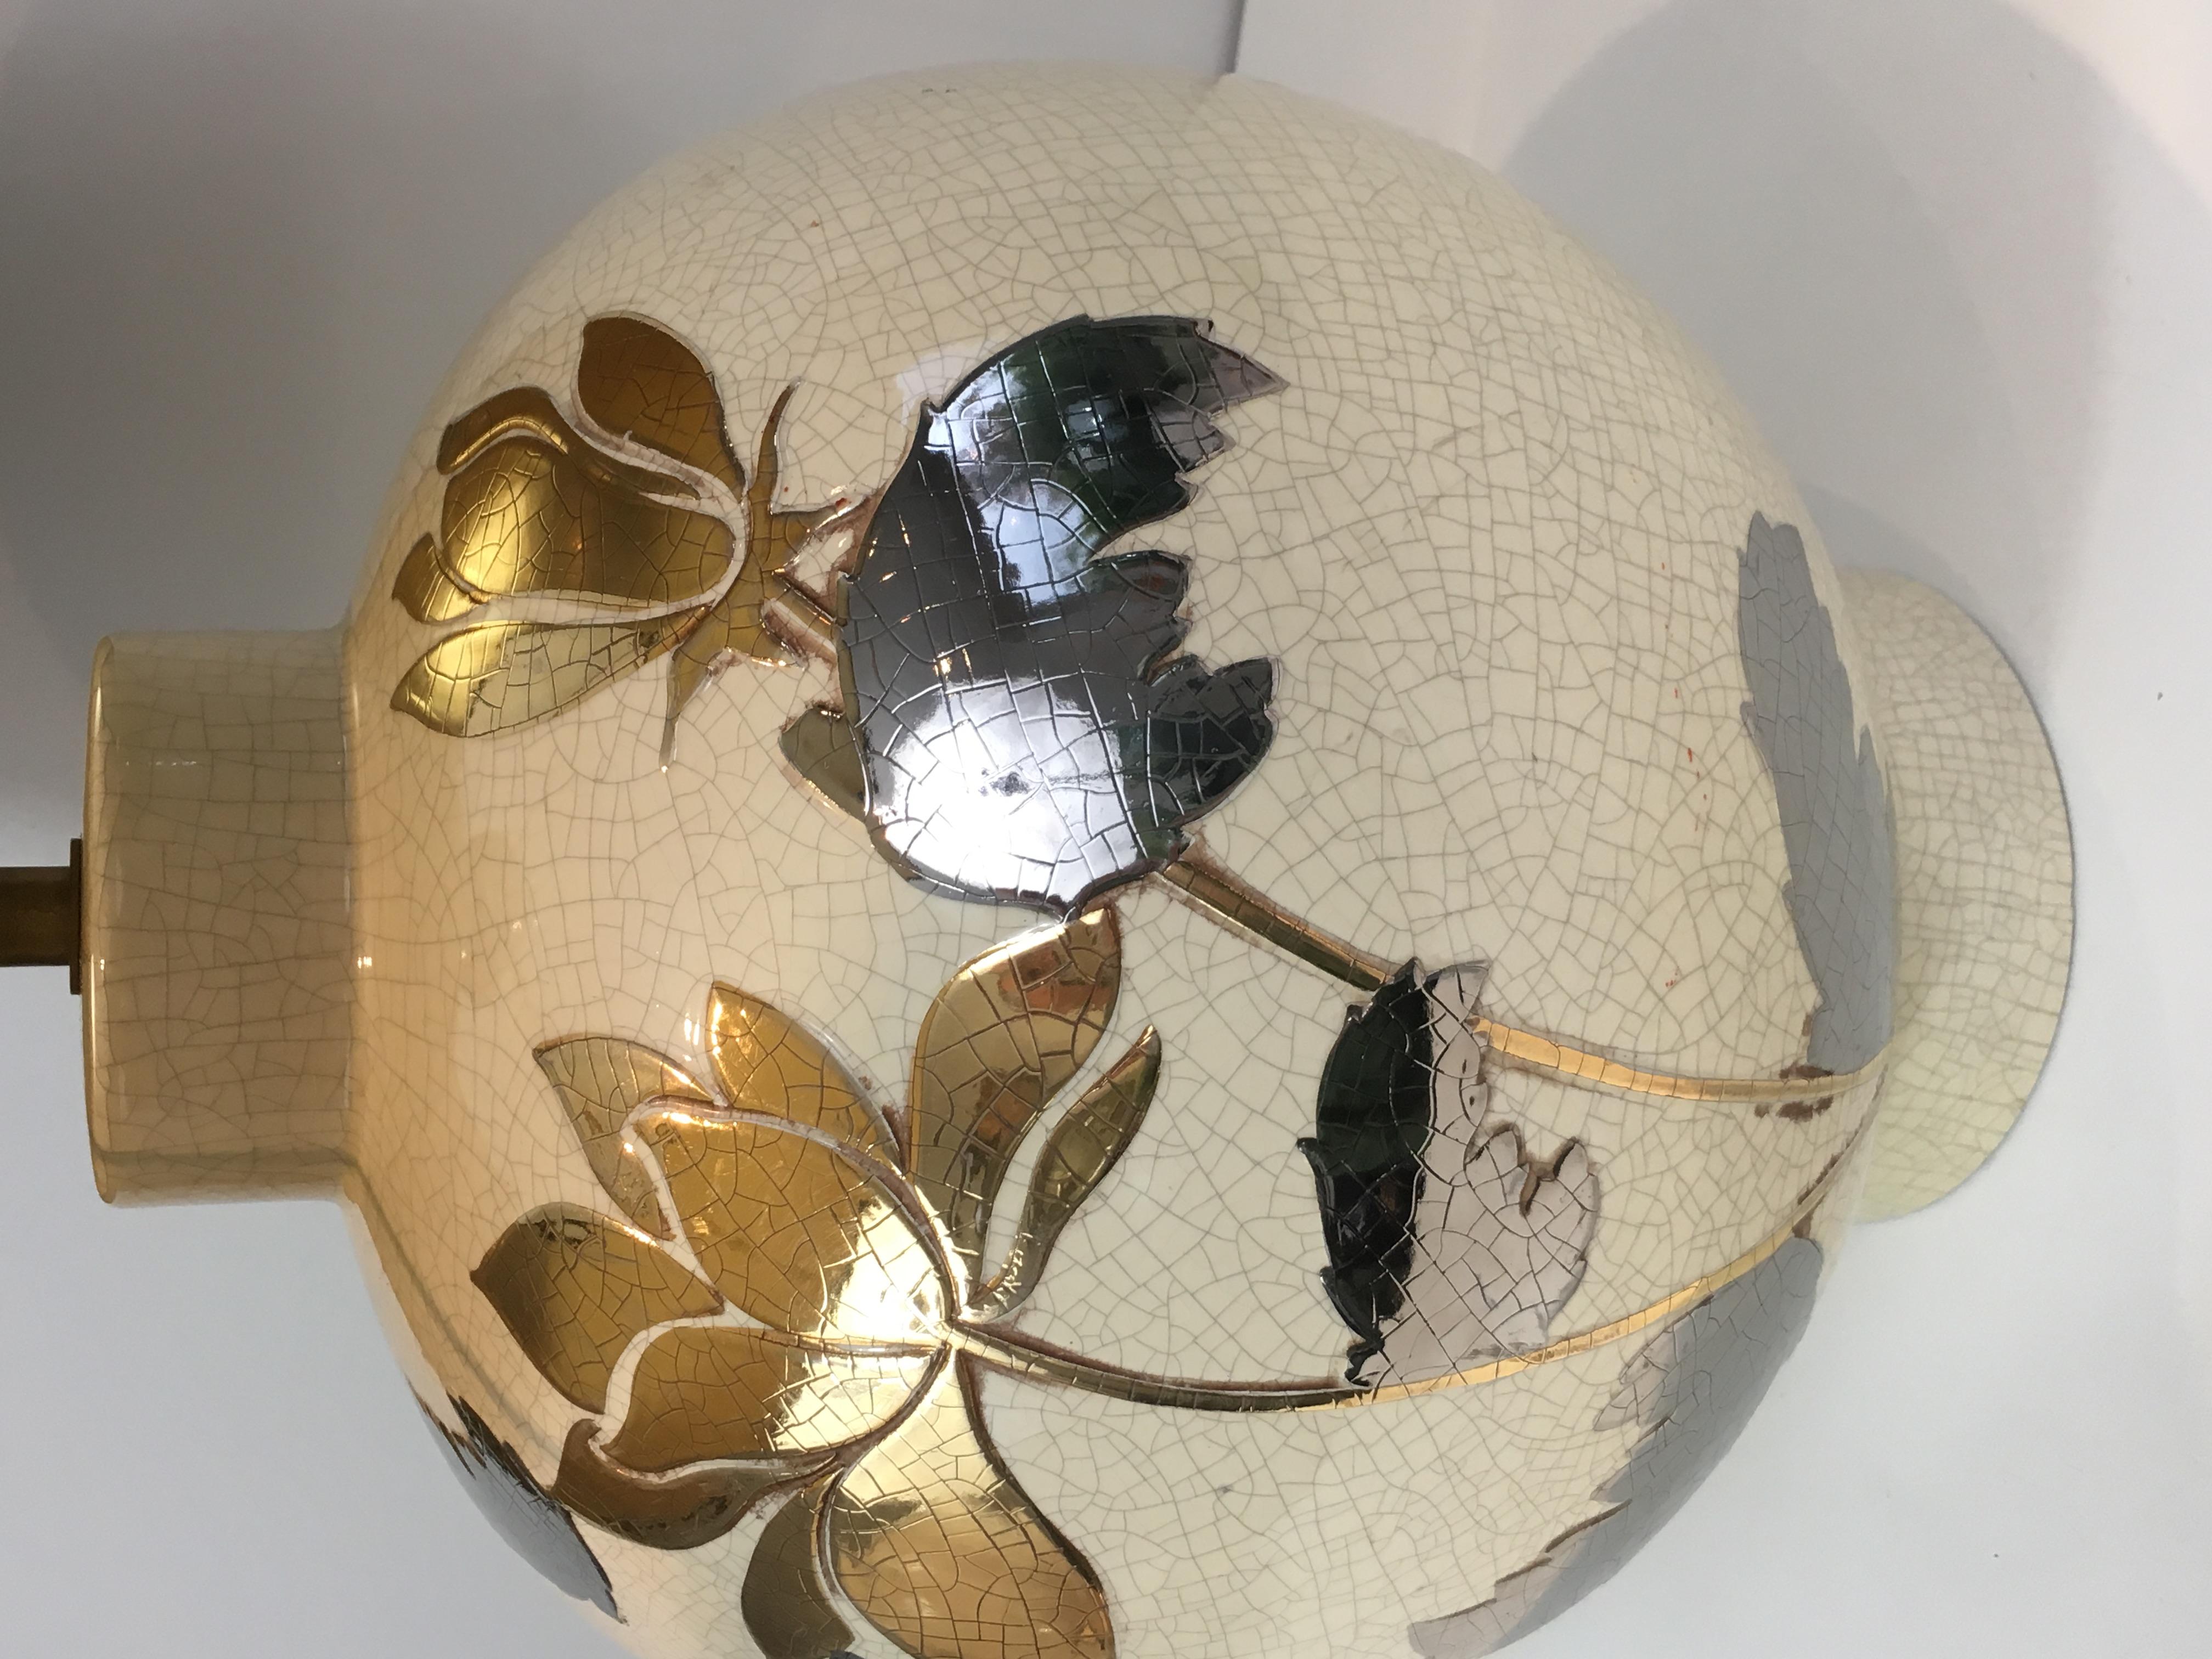 By L Drummer, Cracked Ceramic Lamp with Silver and Gold Flower Decoration on the 4